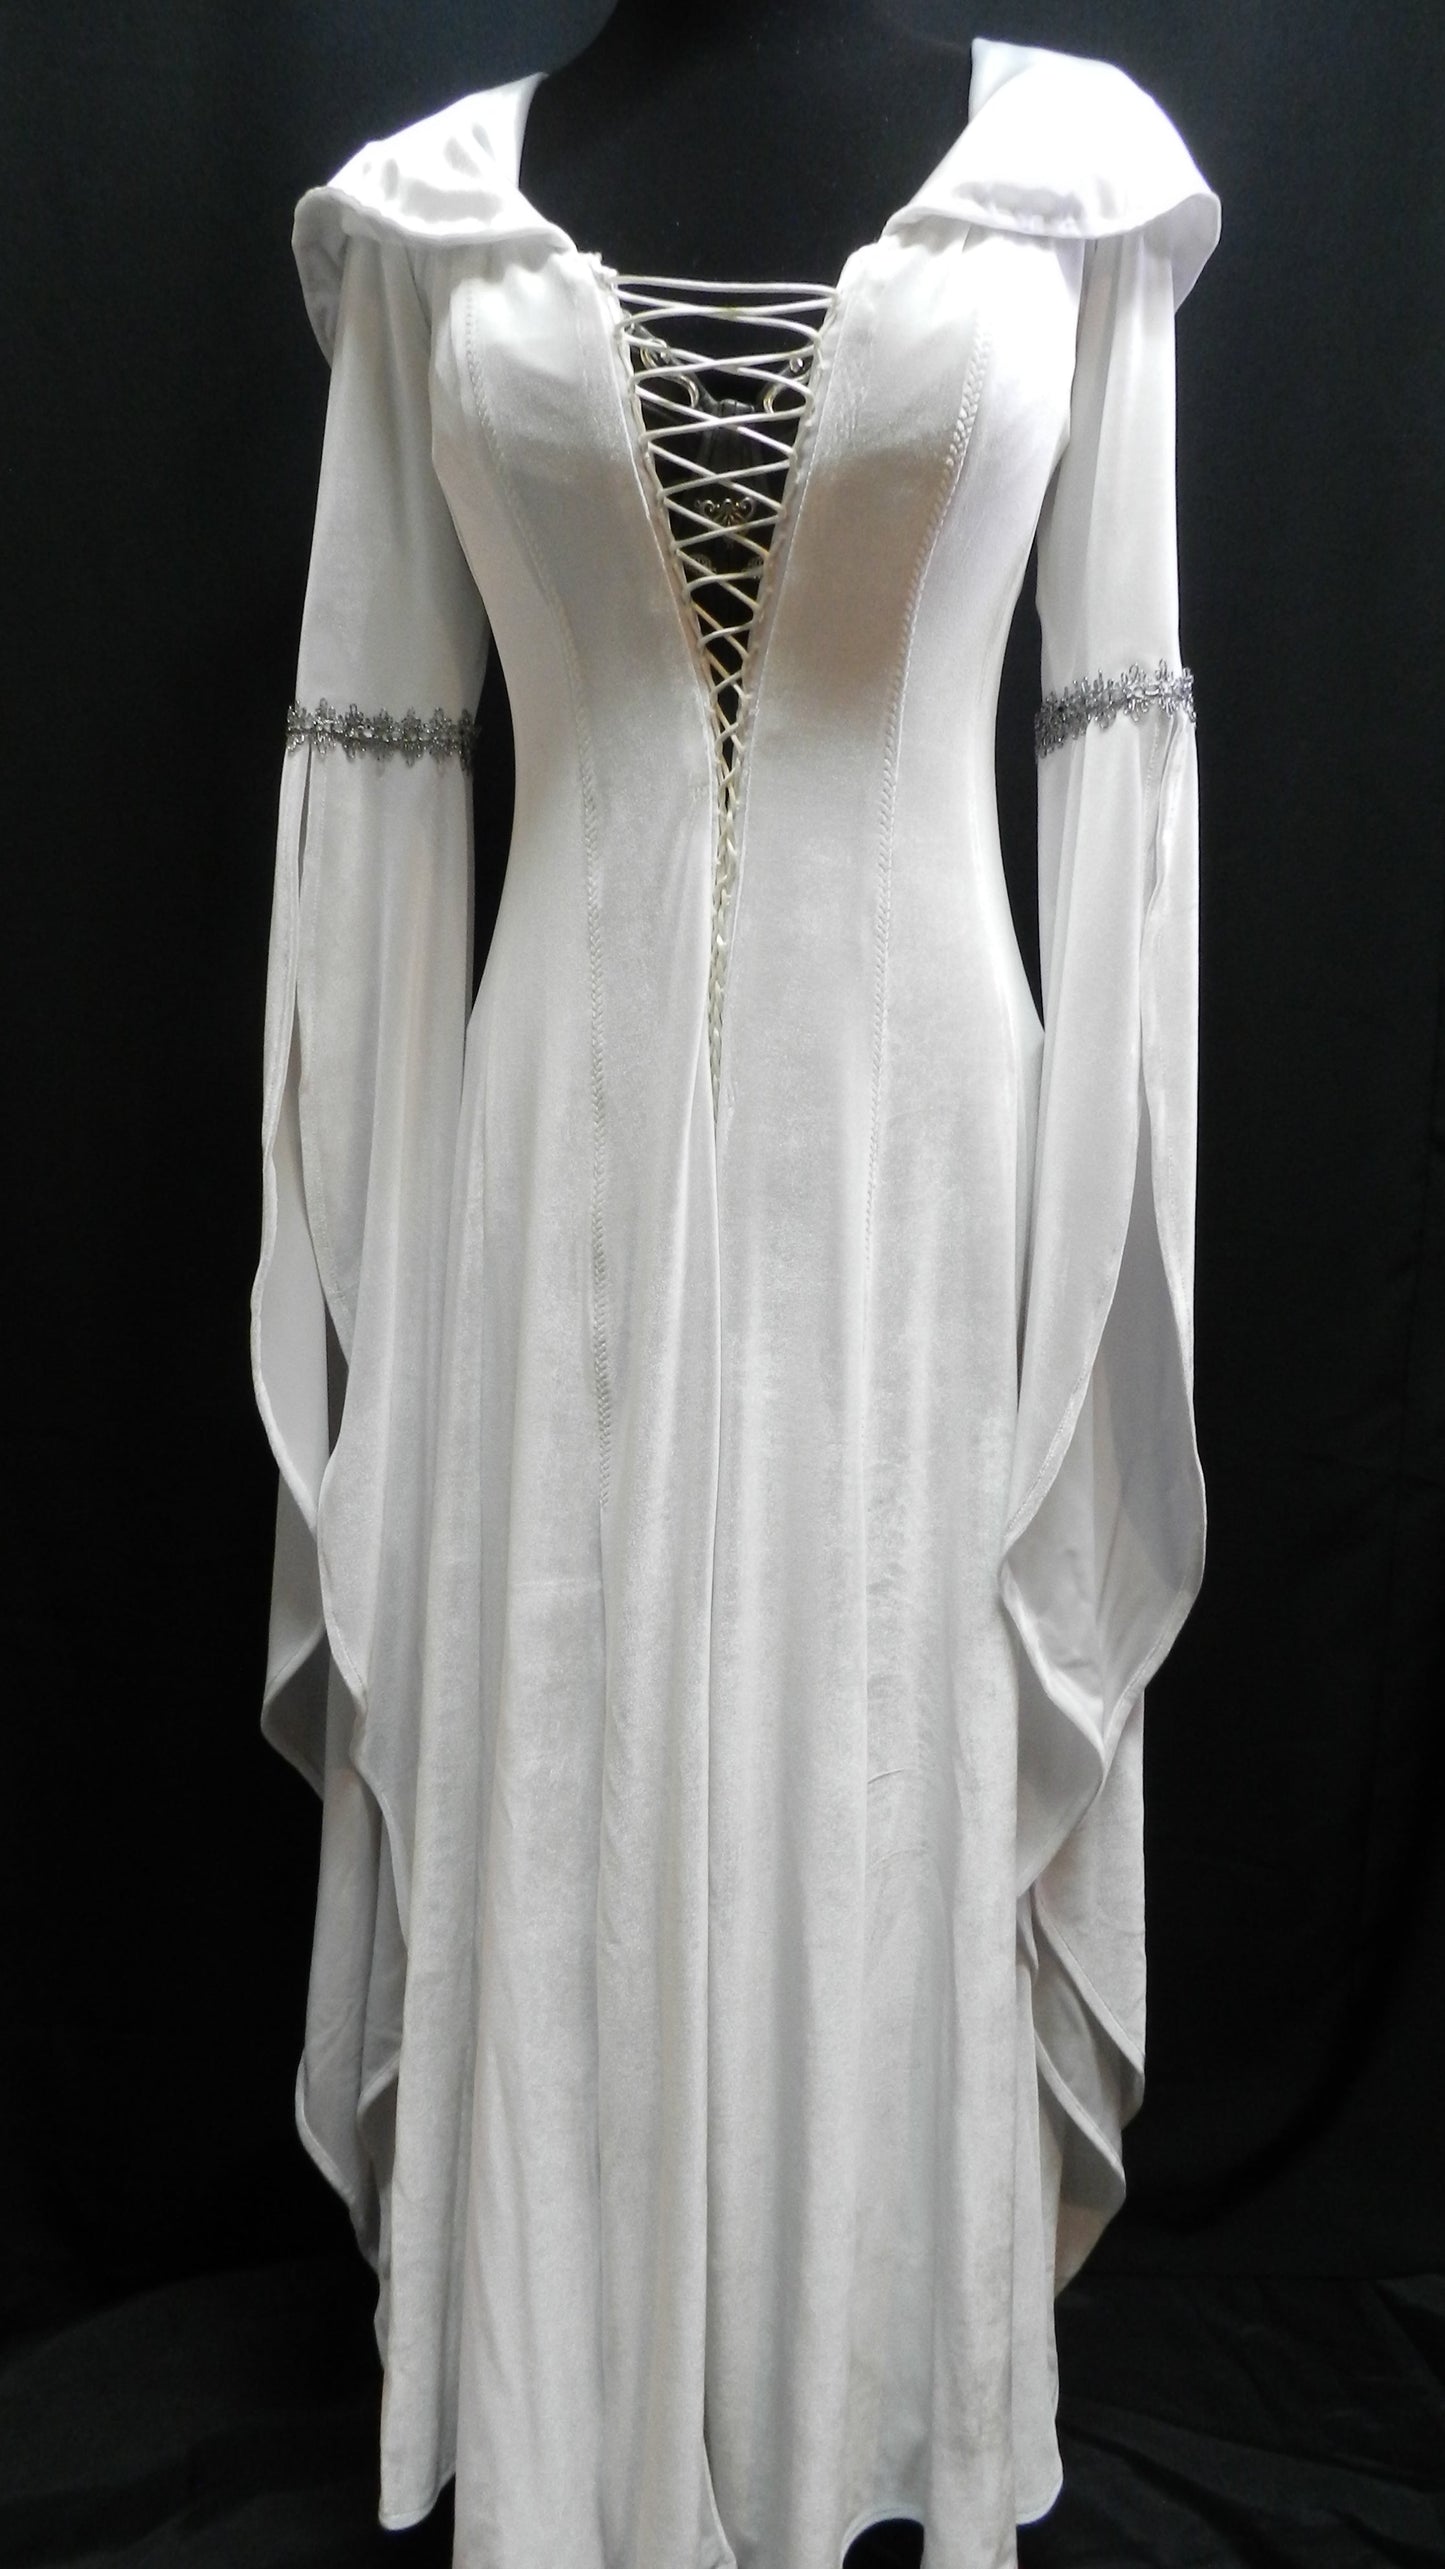 Reserved to Nicolas Inspired by Legend of the Seeker Kahlan's white shirt confessor custom made to your size!